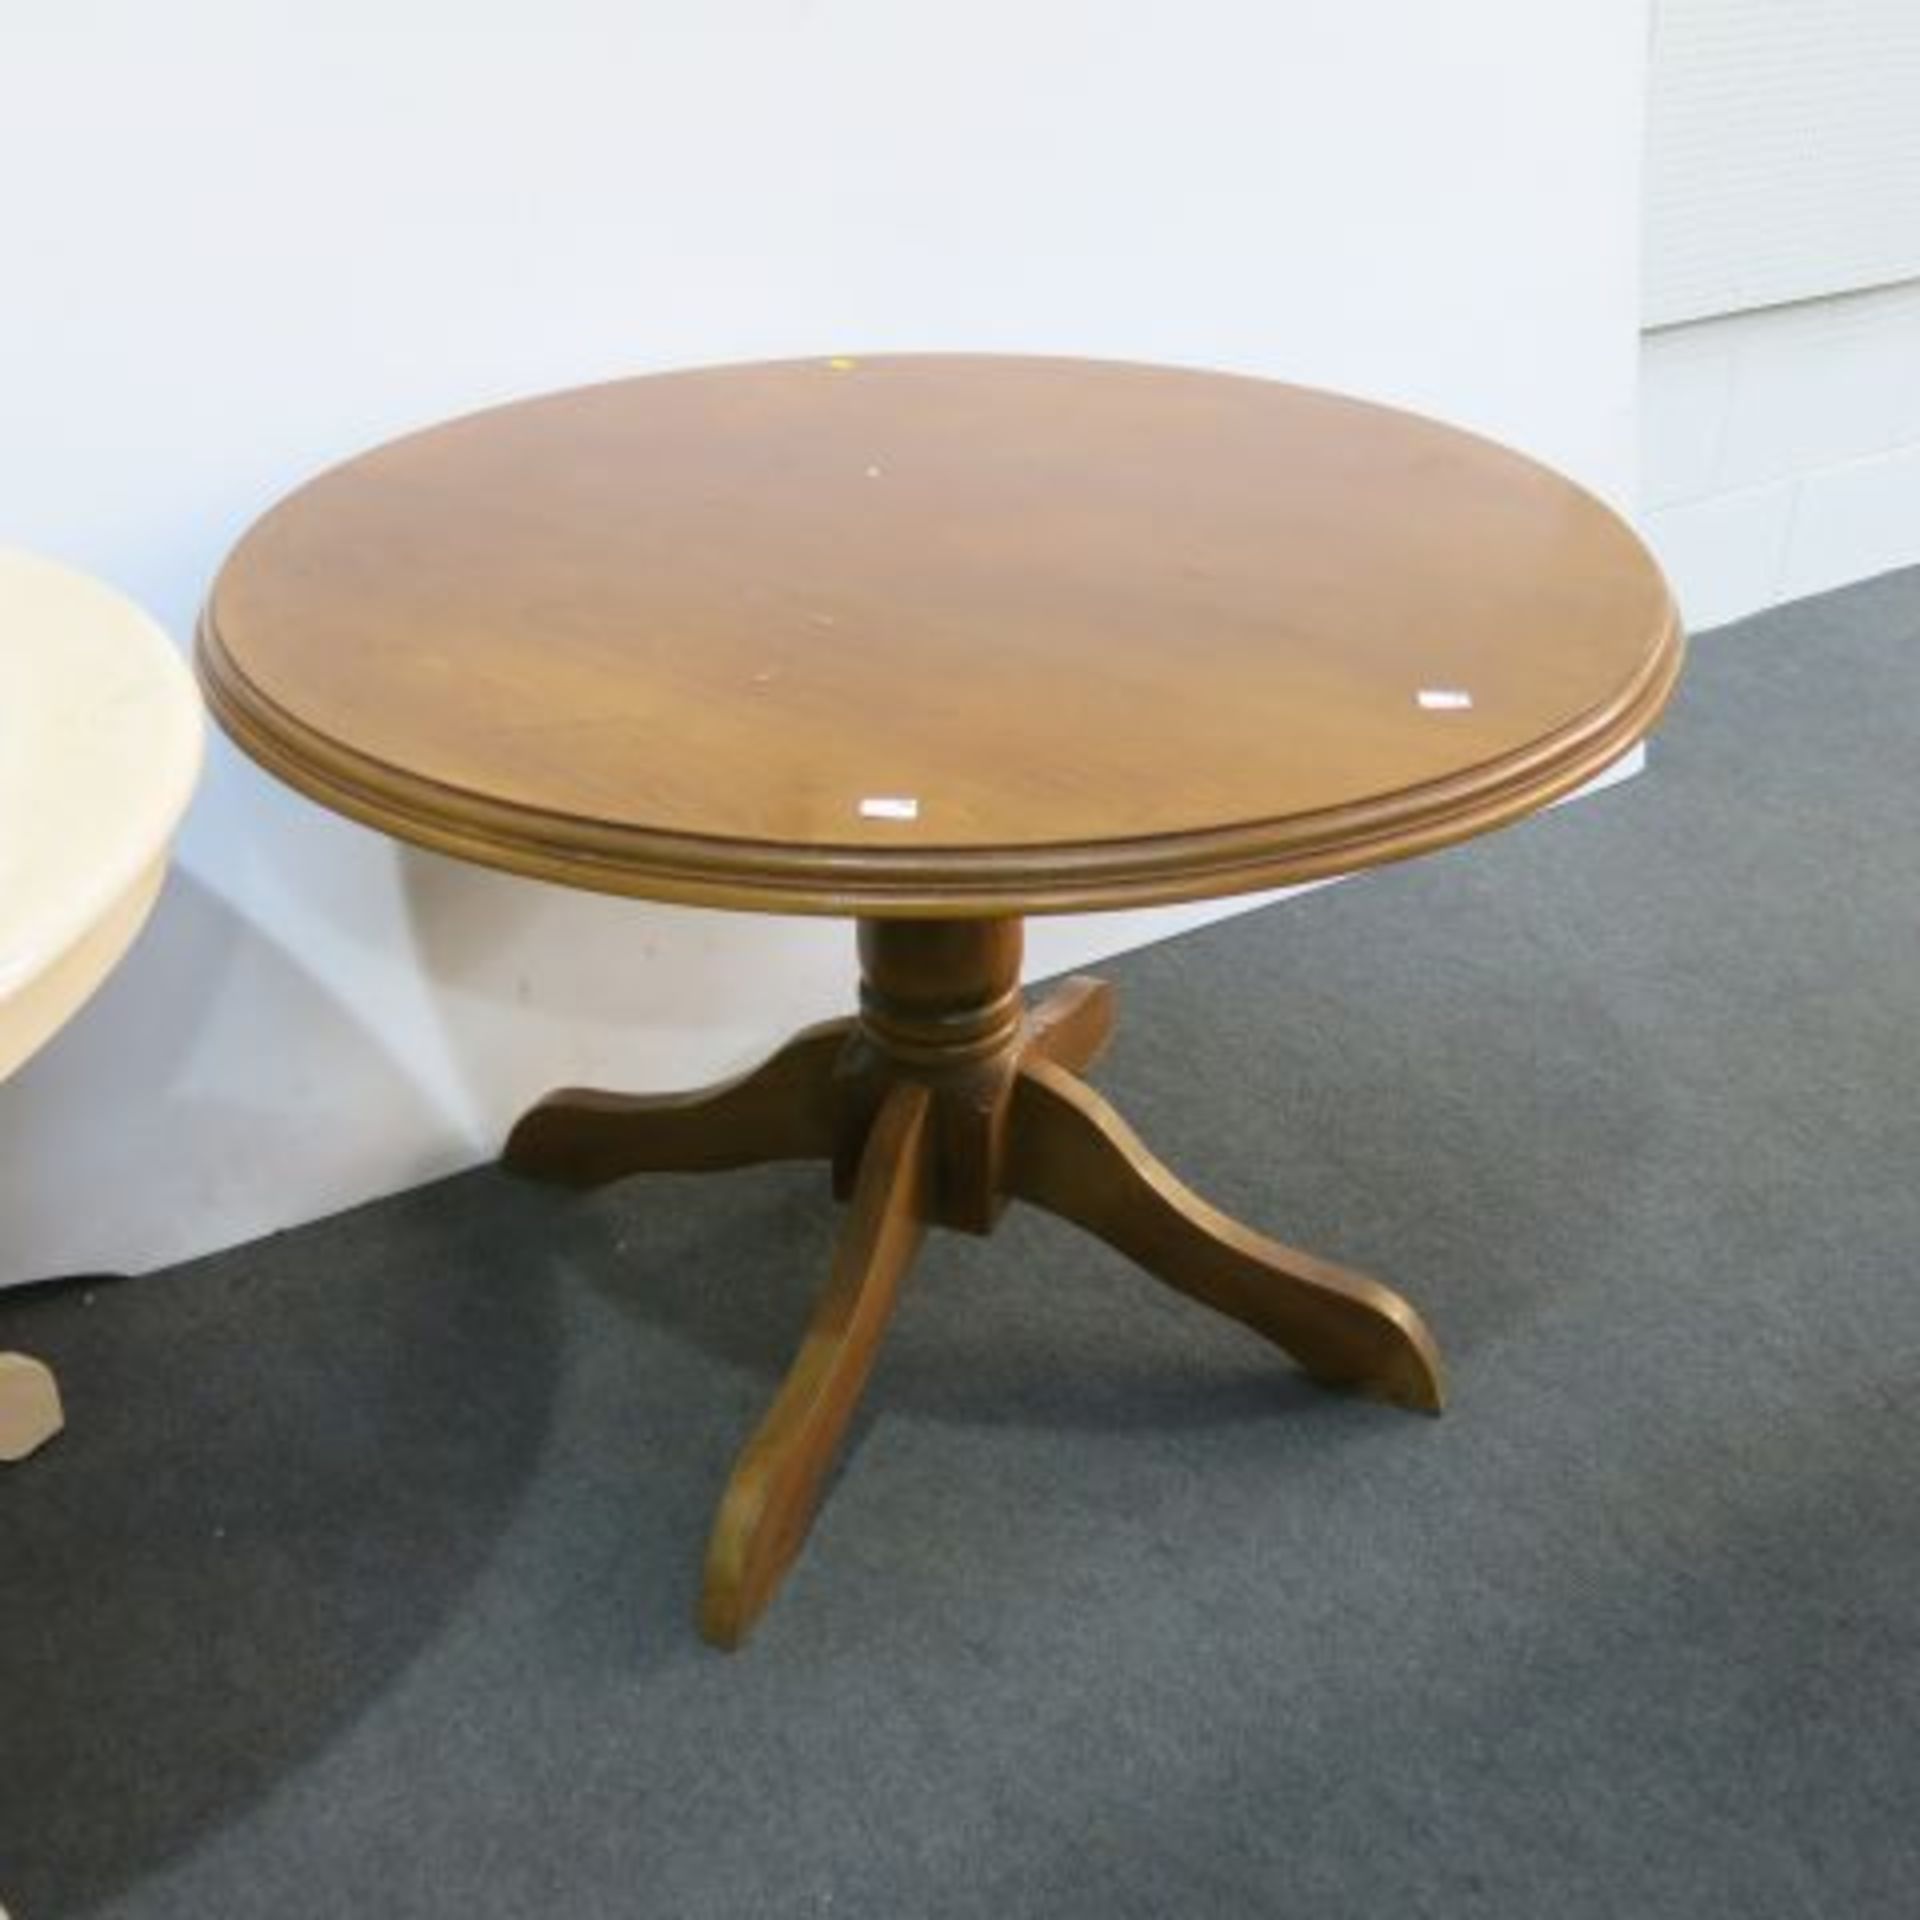 Four Tables. Two Pine Tables 90cm in diameter on Grey Painted Metal Supports, A Bleached Pine - Image 4 of 4